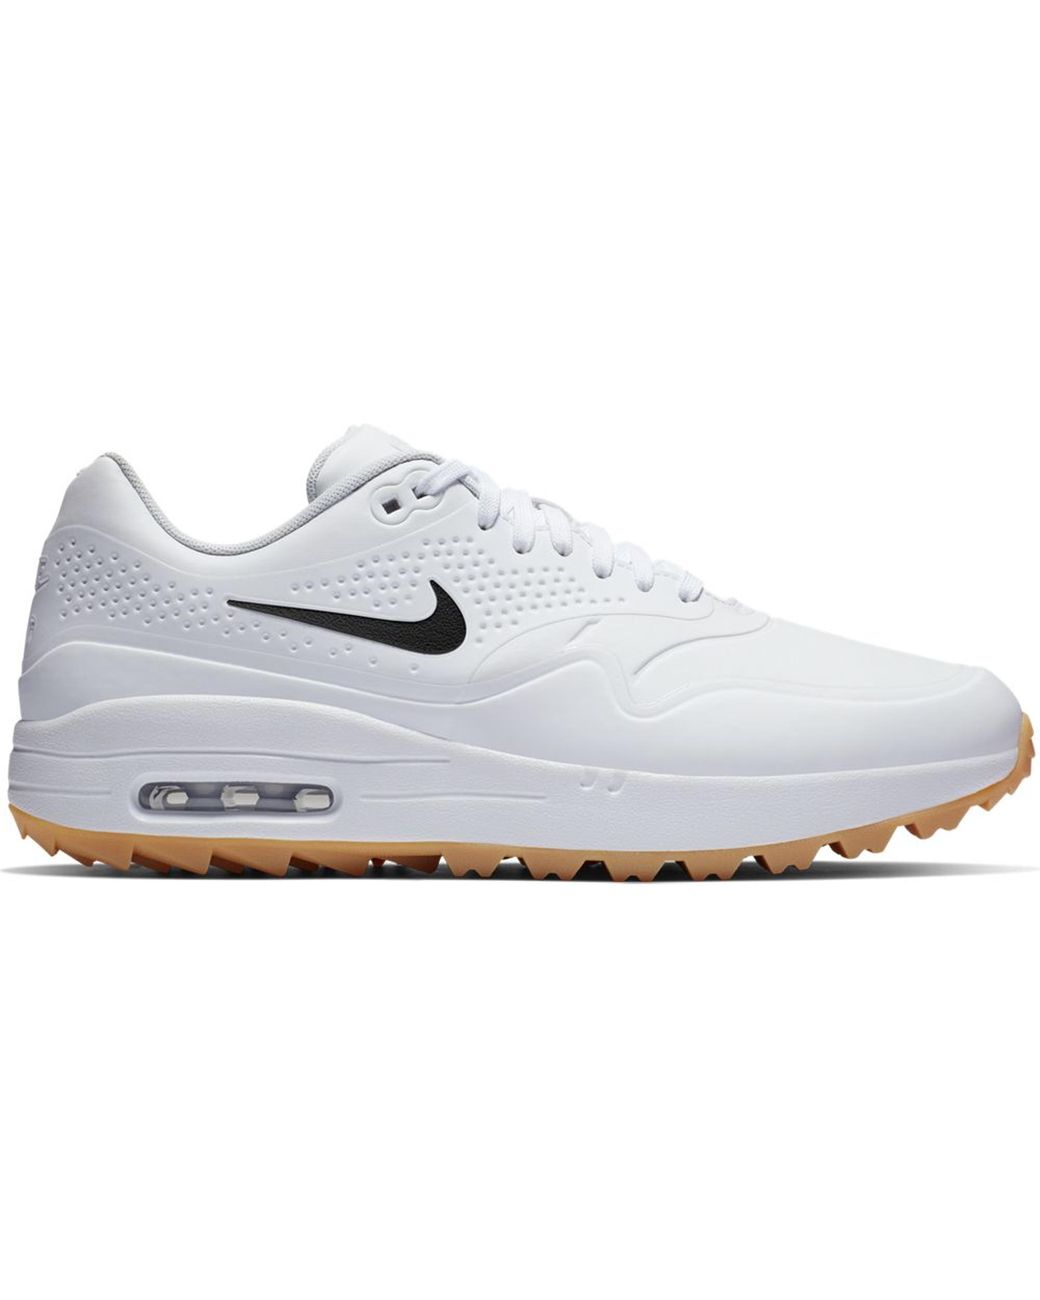 white air max with black swoosh